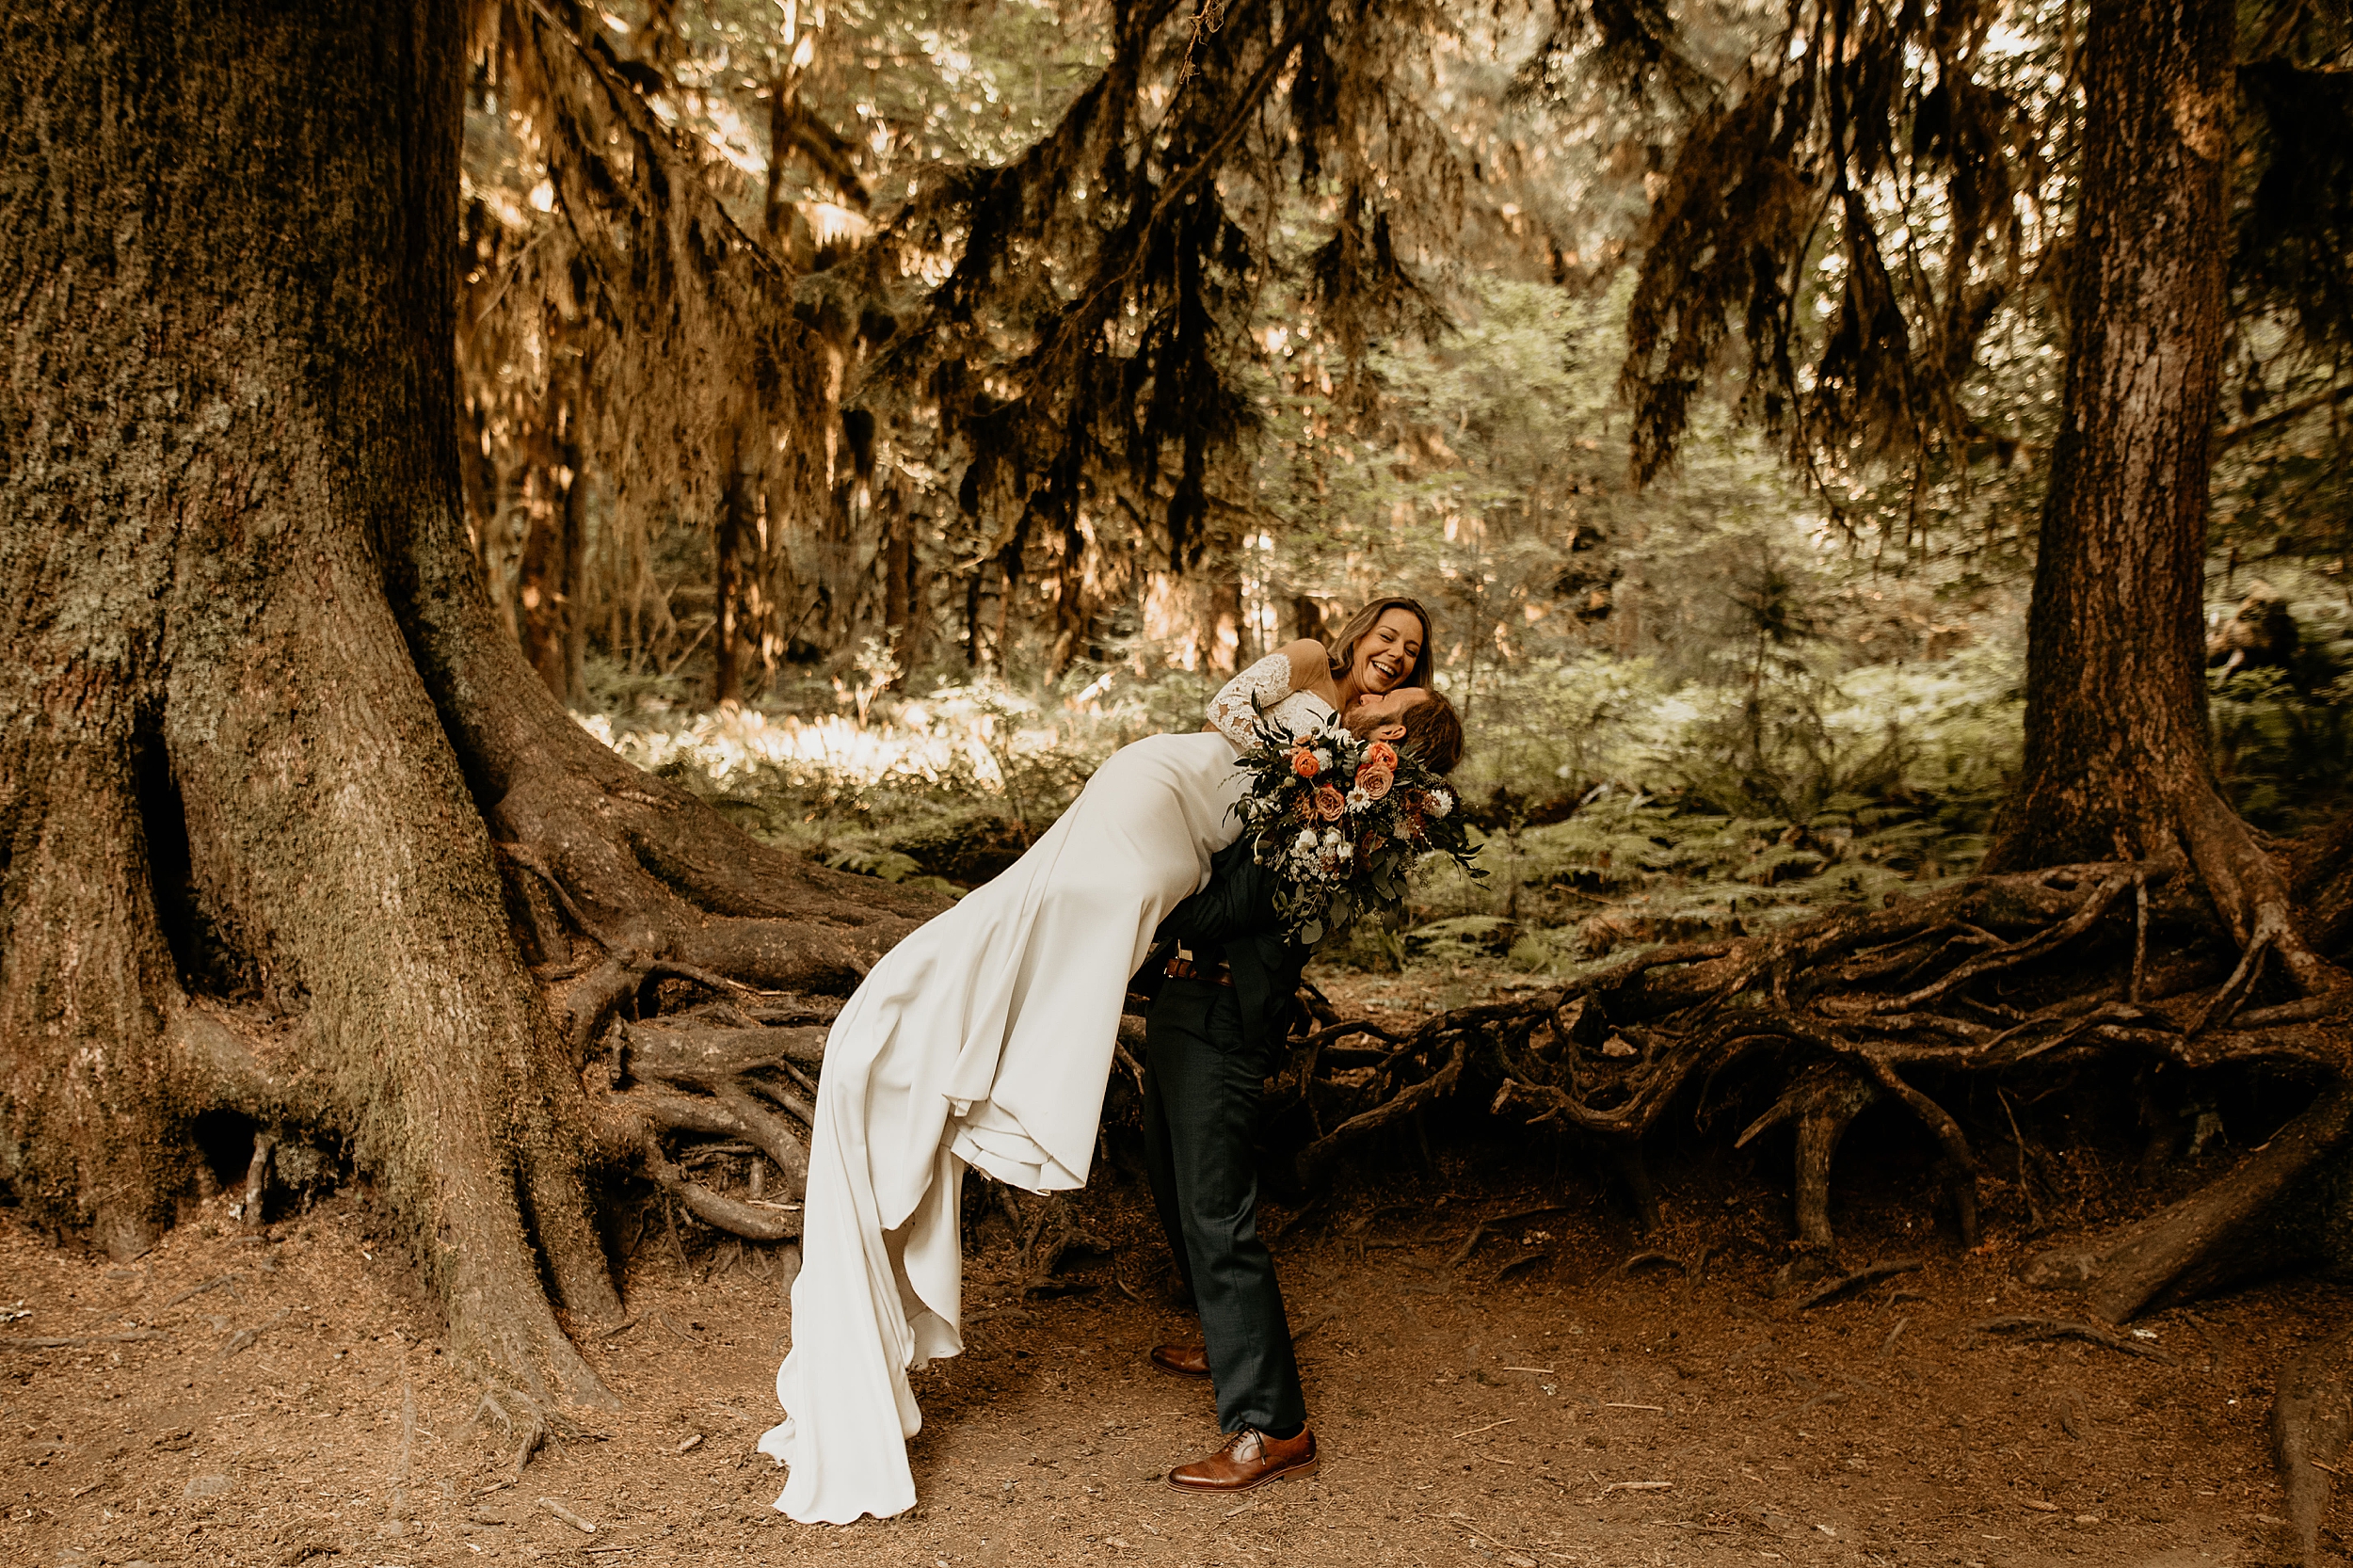 bride and groom holding each other forest landscape

